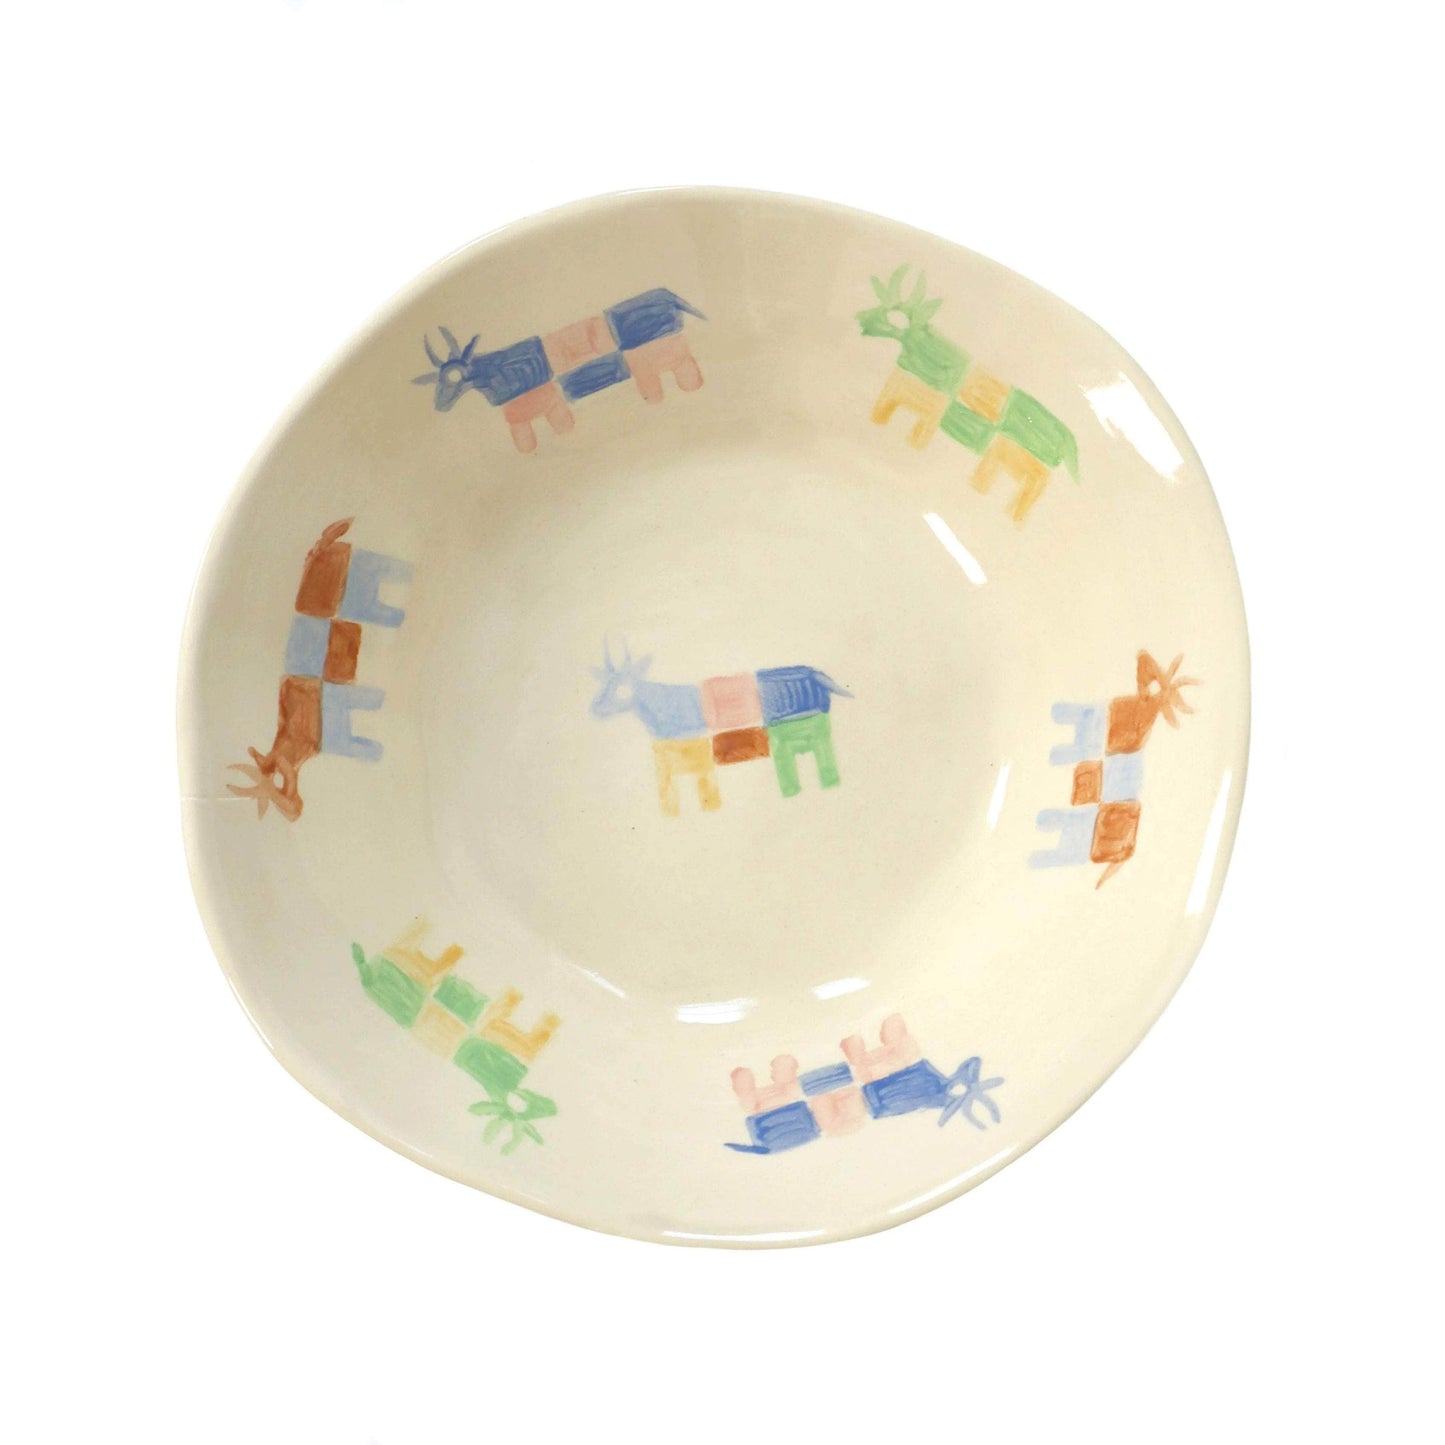 'Moo' Hand Painted Cows Bowl